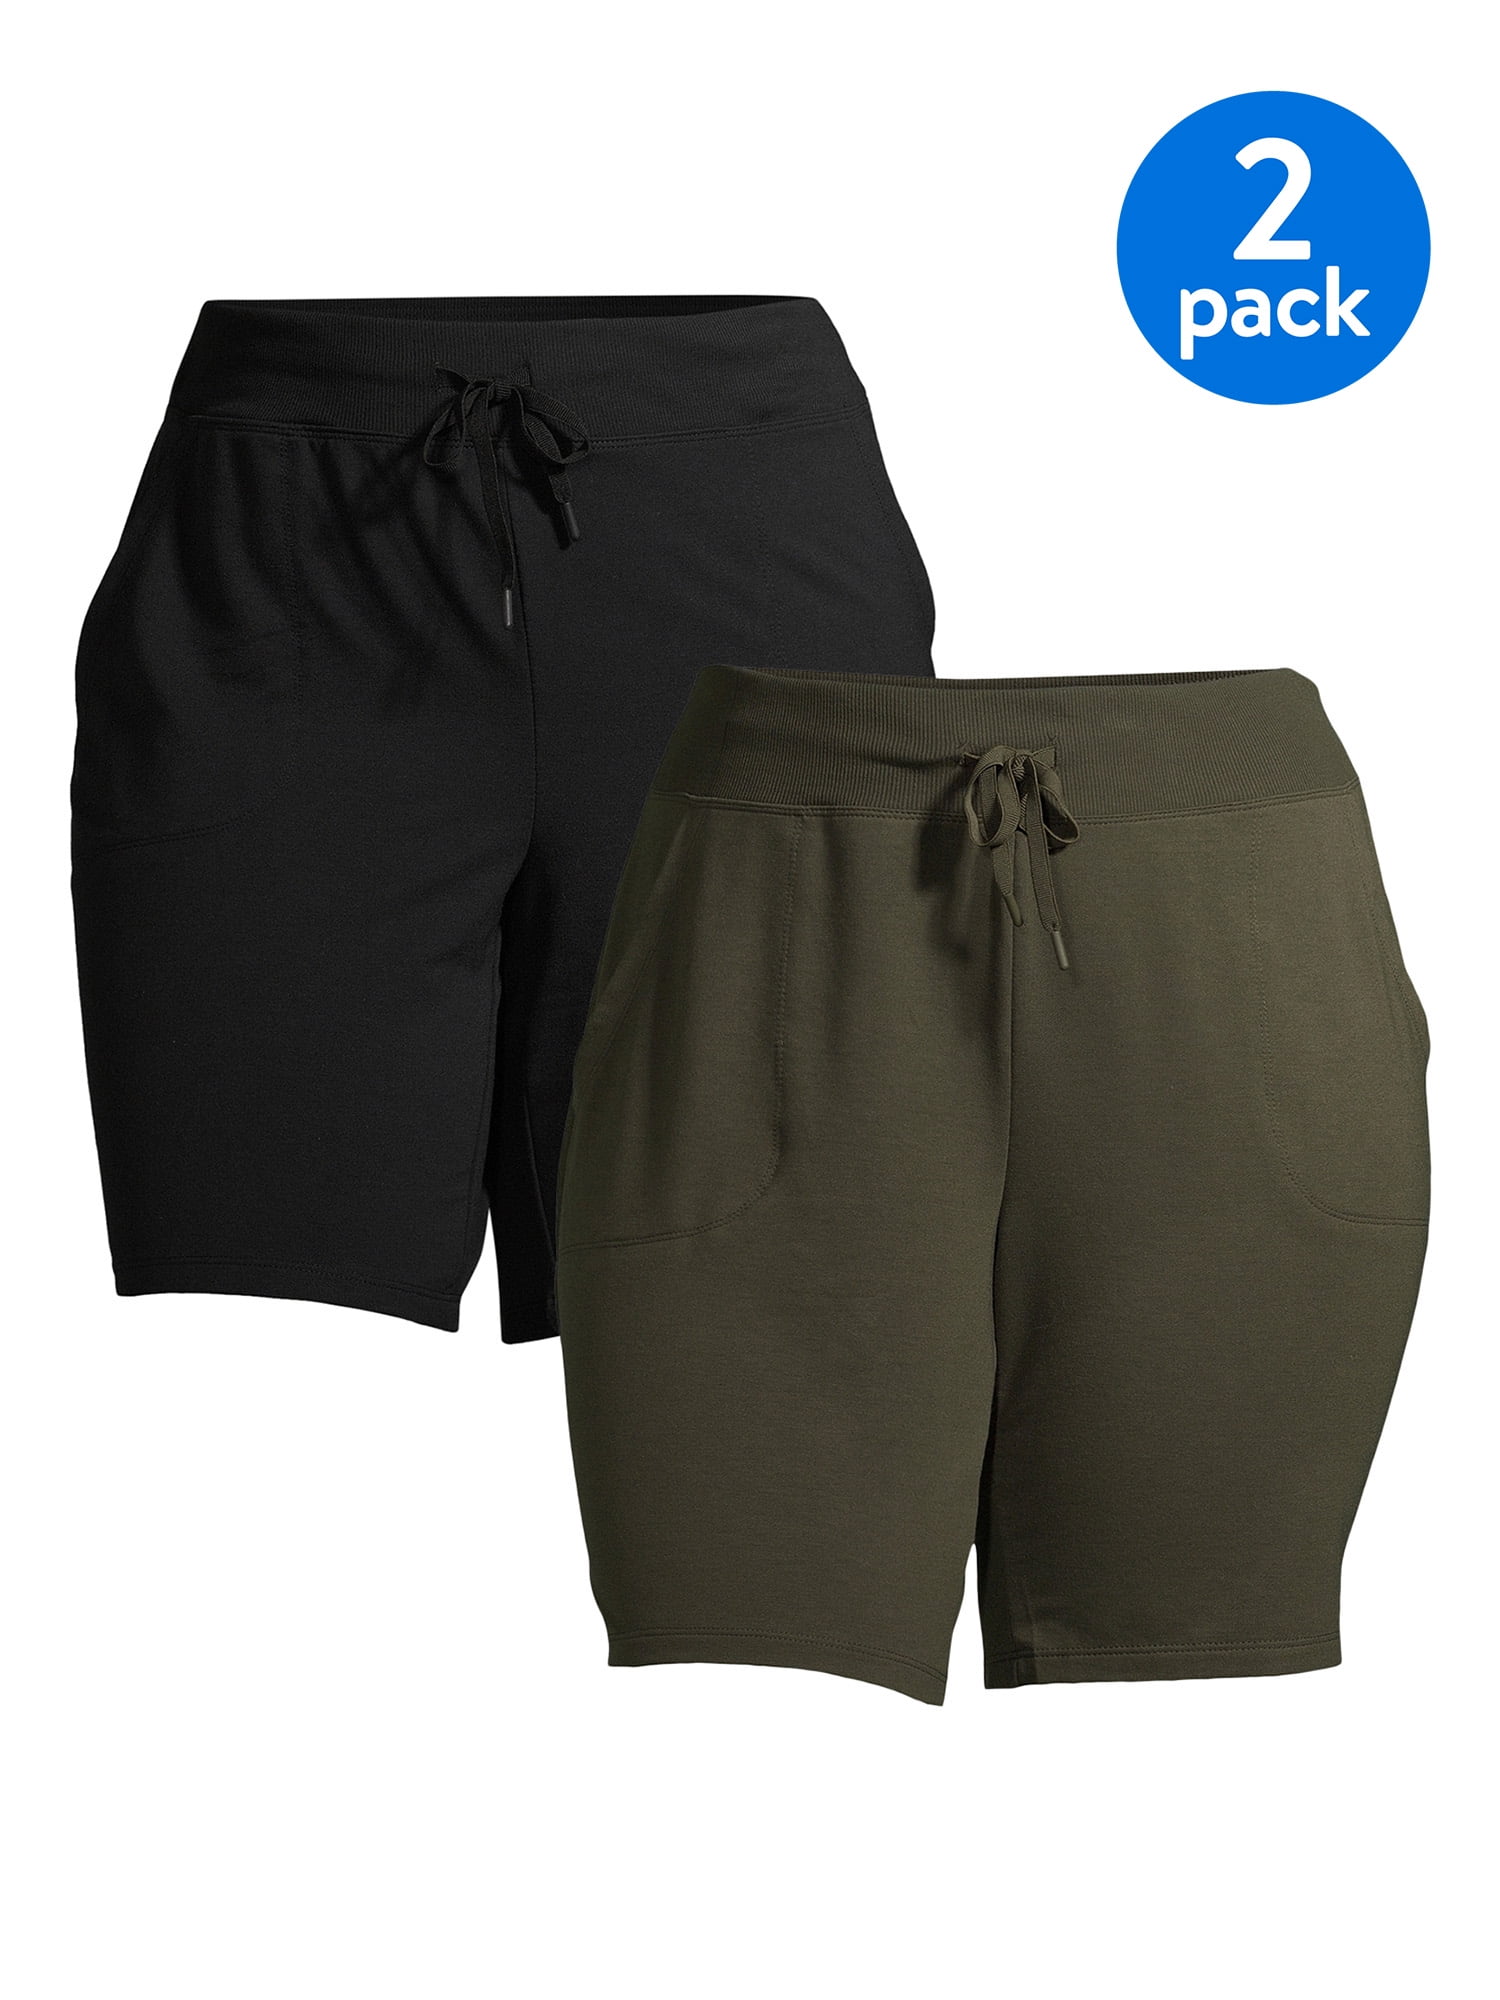 Athletic Works Plus Size French Terry Bermuda Shorts, 2-Pack - Walmart.com